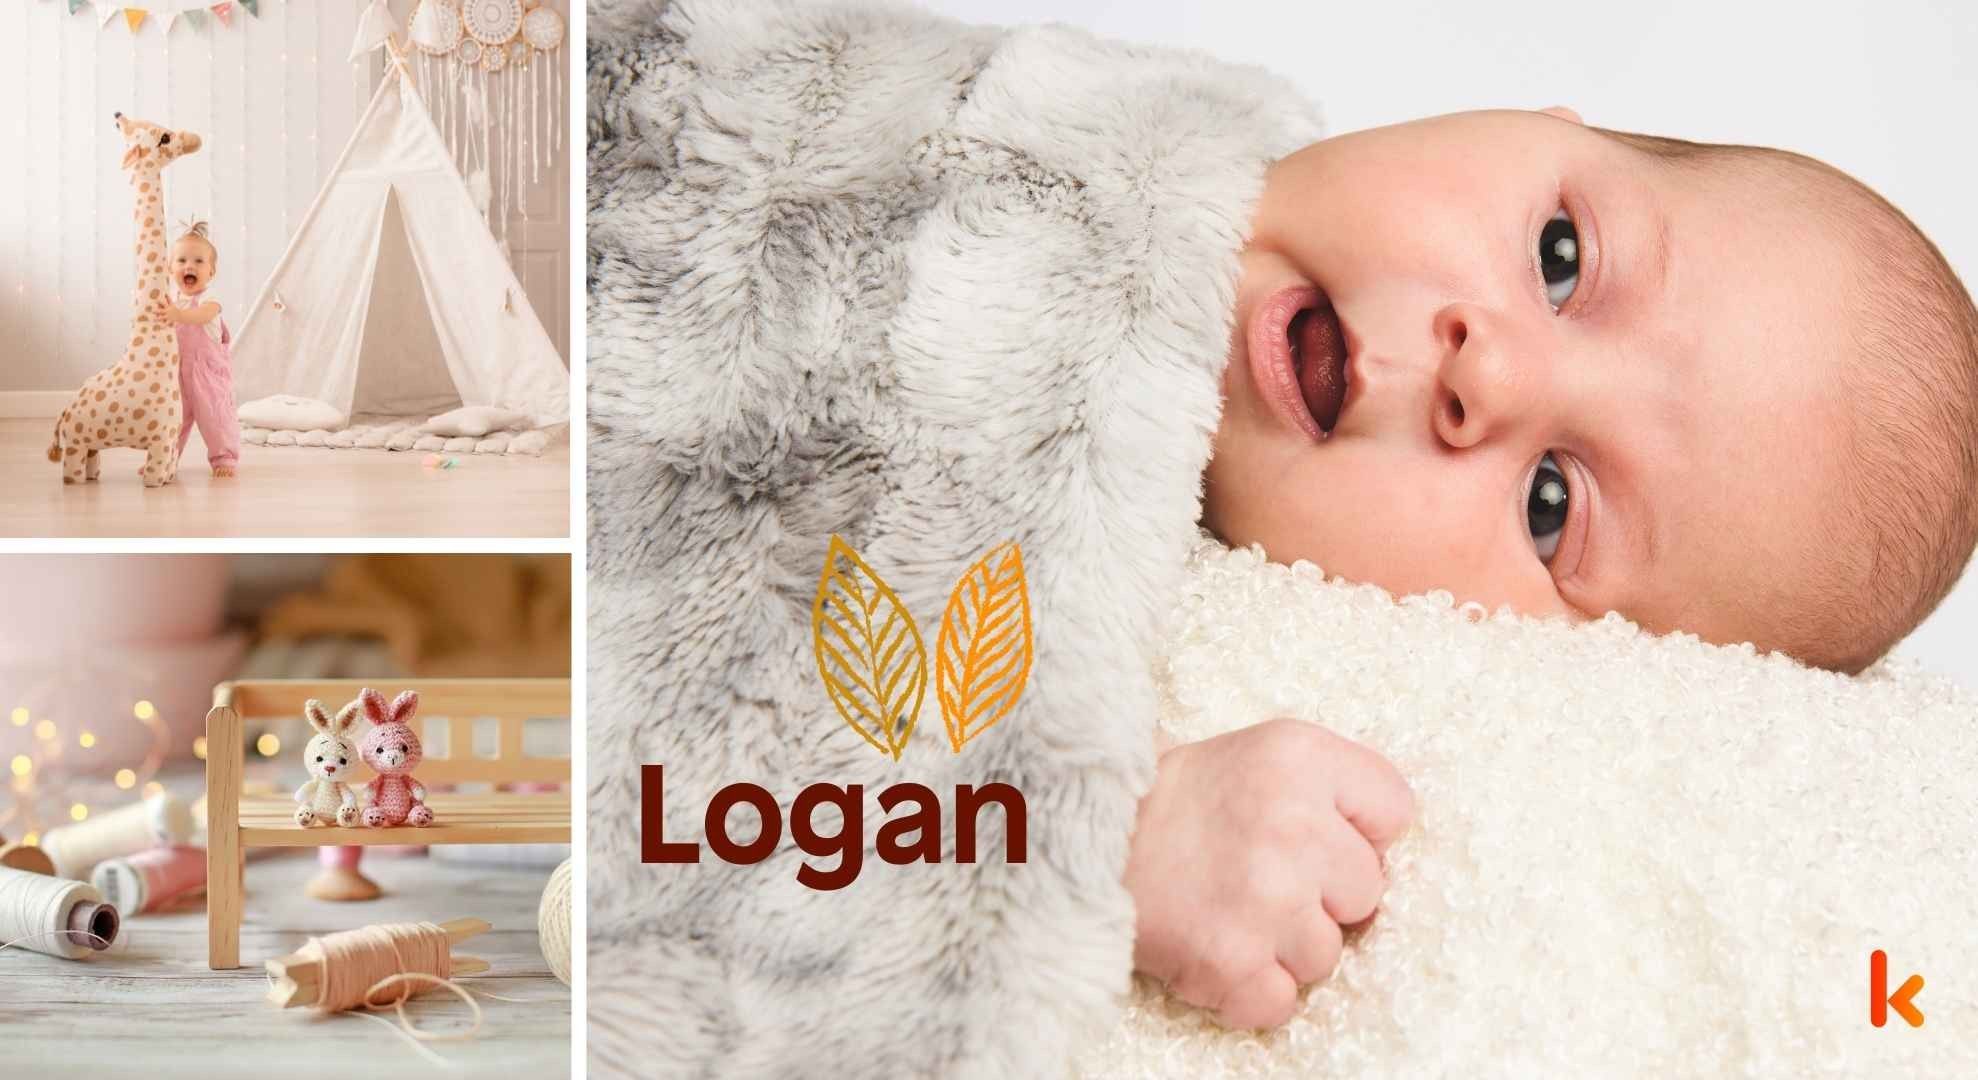 Meaning of the name Logan